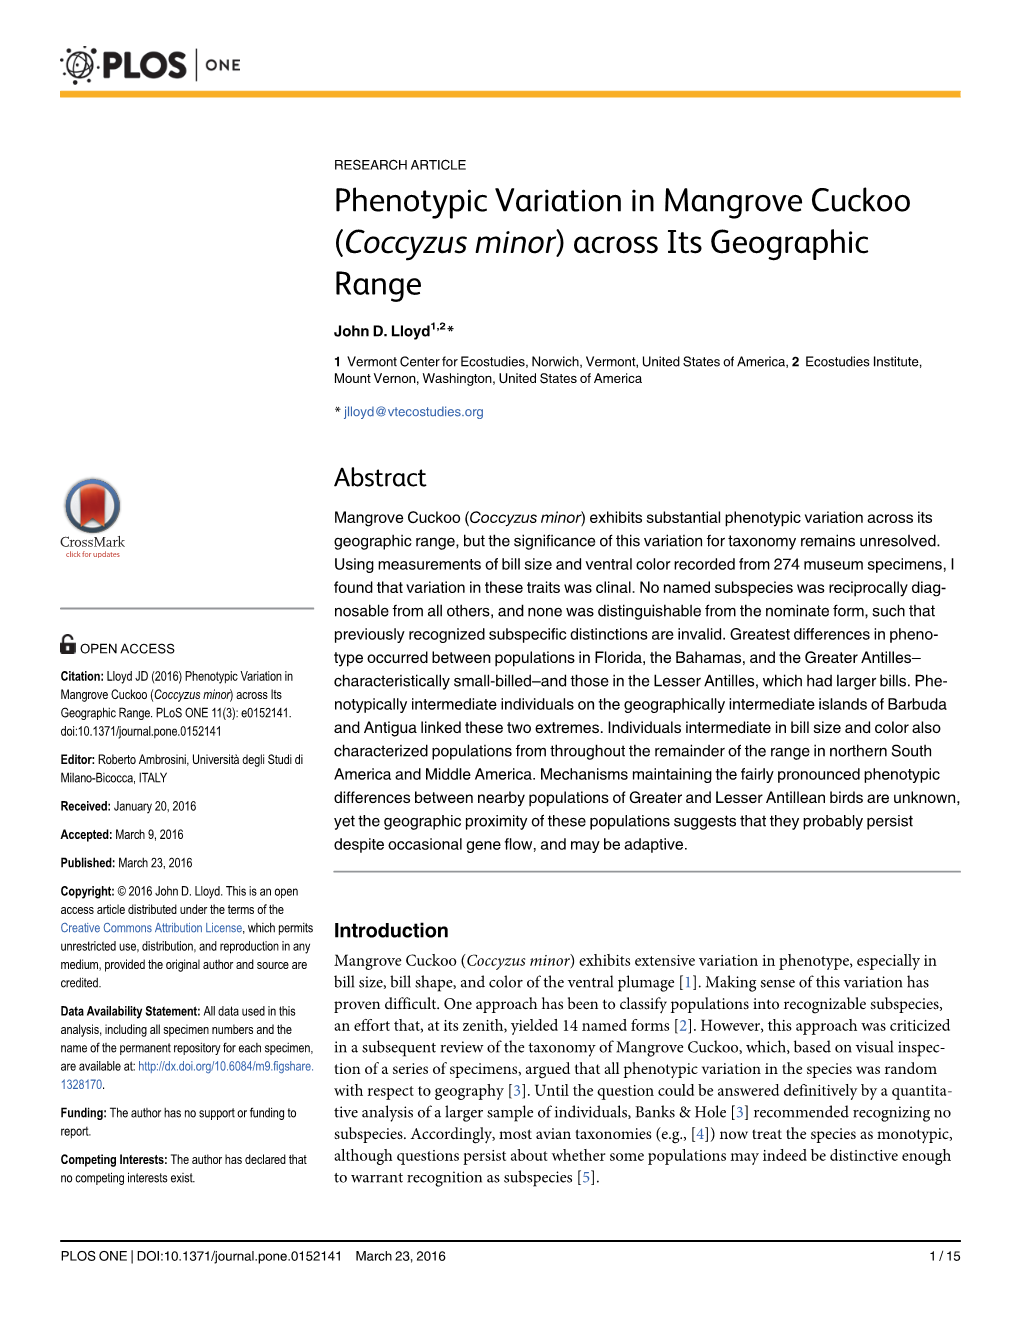 Phenotypic Variation in Mangrove Cuckoo (Coccyzus Minor) Across Its Geographic Range